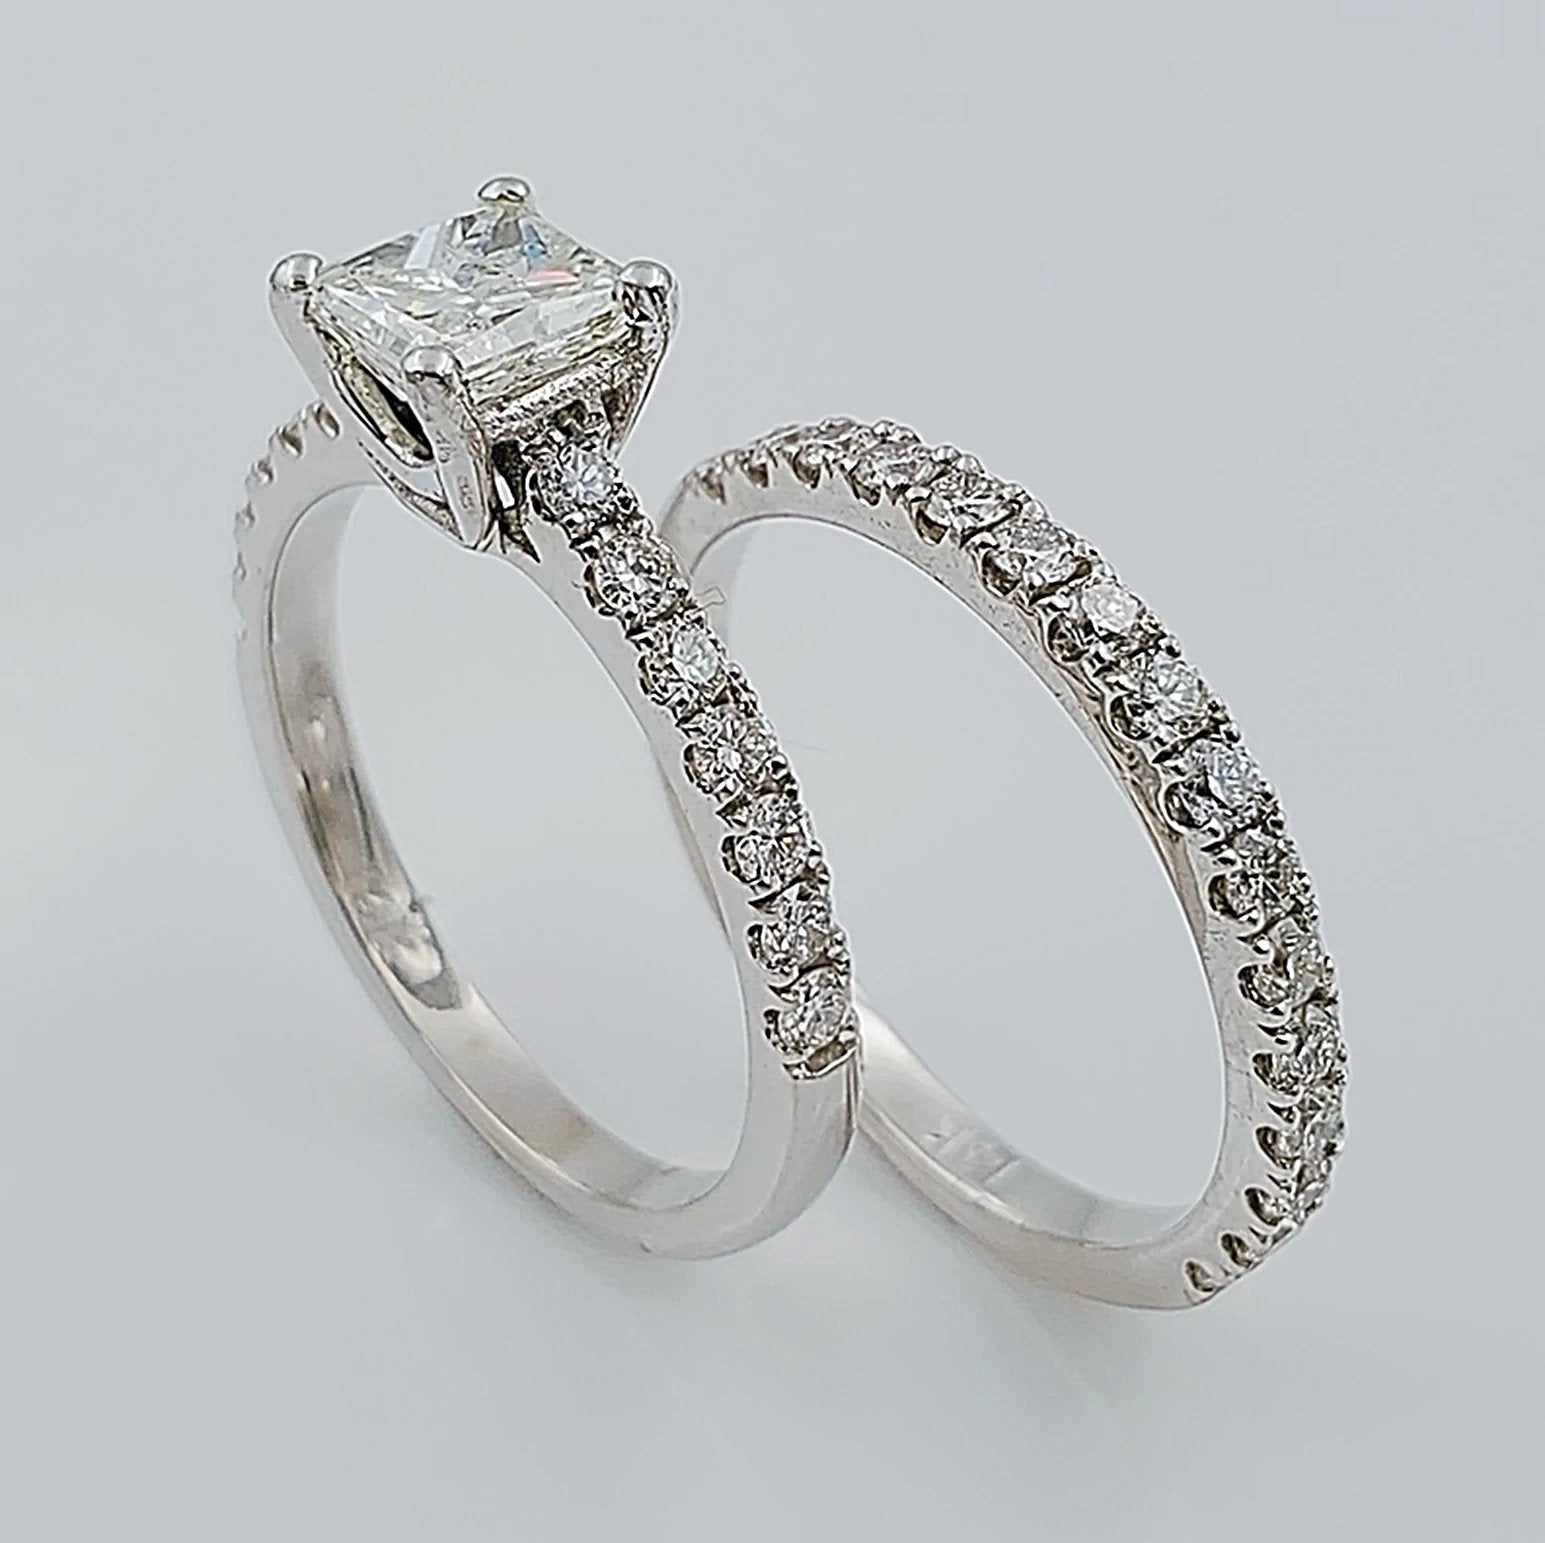 Women's 14K White Gold with 0.70 CT Princess Center Diamond (I1 Color J) 4.4 GR Total Weight Wedding Ring Set. (Size: 6.50)